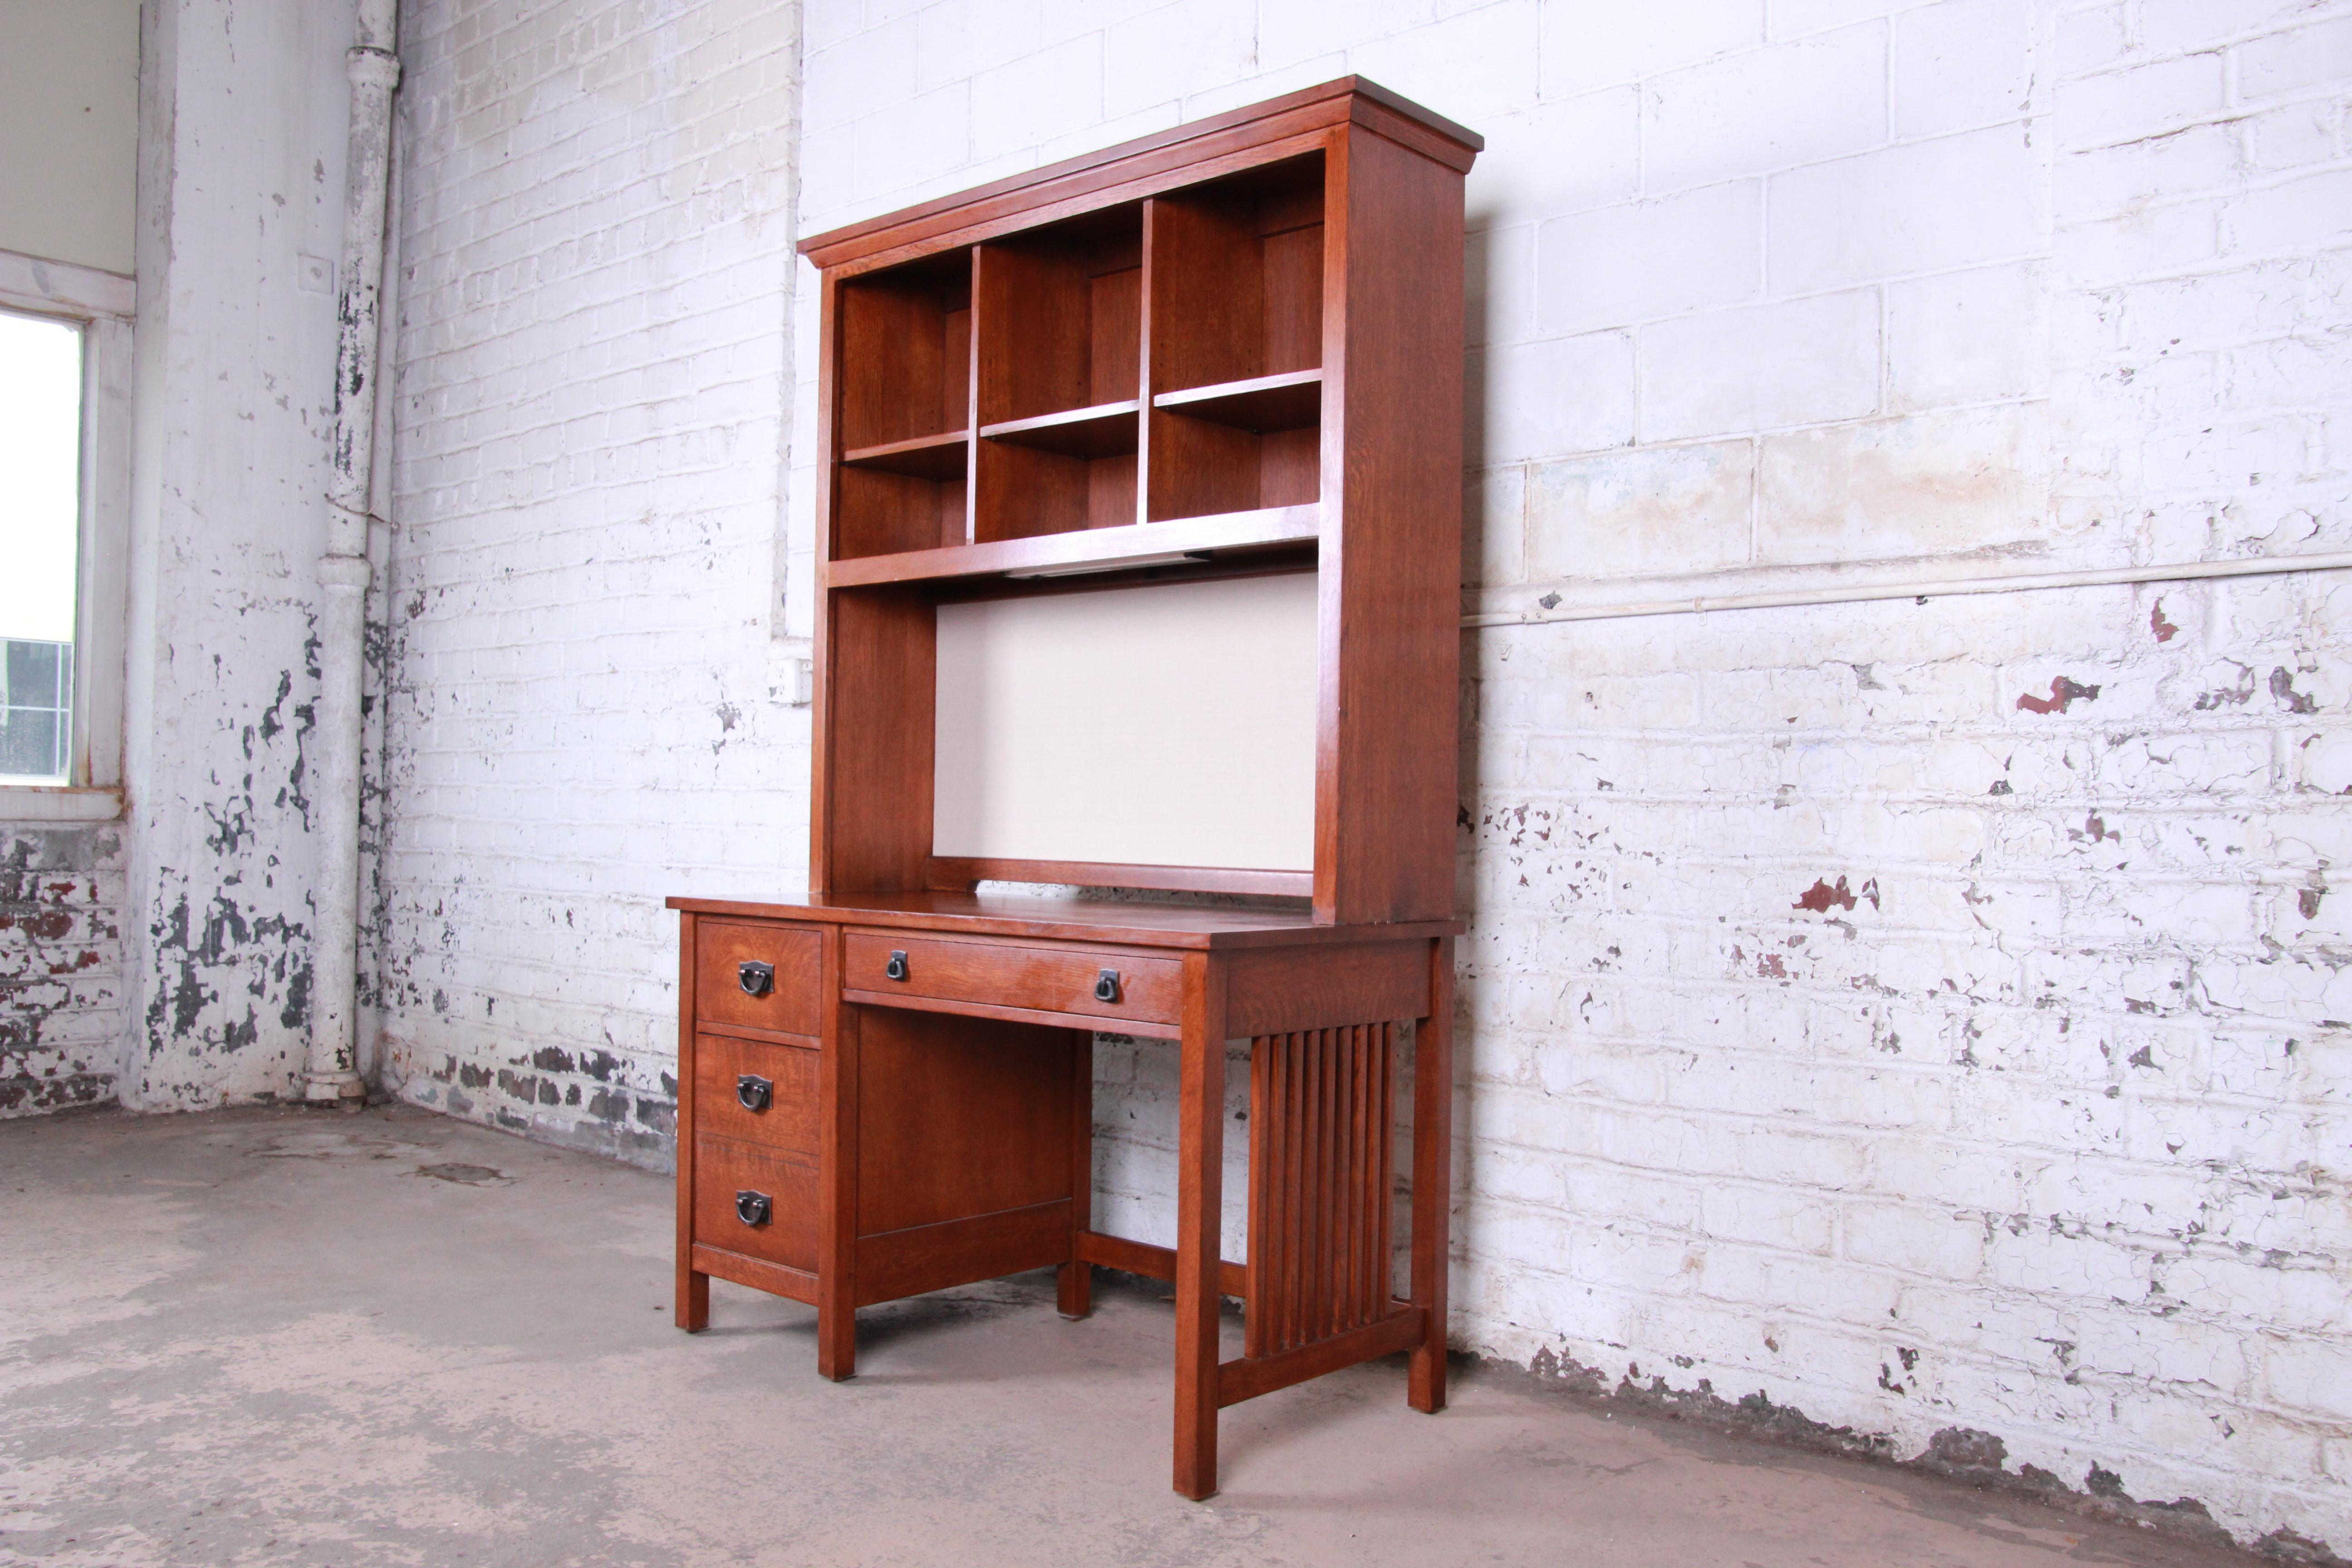 Vintage Mission oak desk by Stickley. The desk offers a lighted hutch top for storage and organization containing three sections with shelving. The desk has a large writing surface with a large drawer on the right portion and two drawers to the left